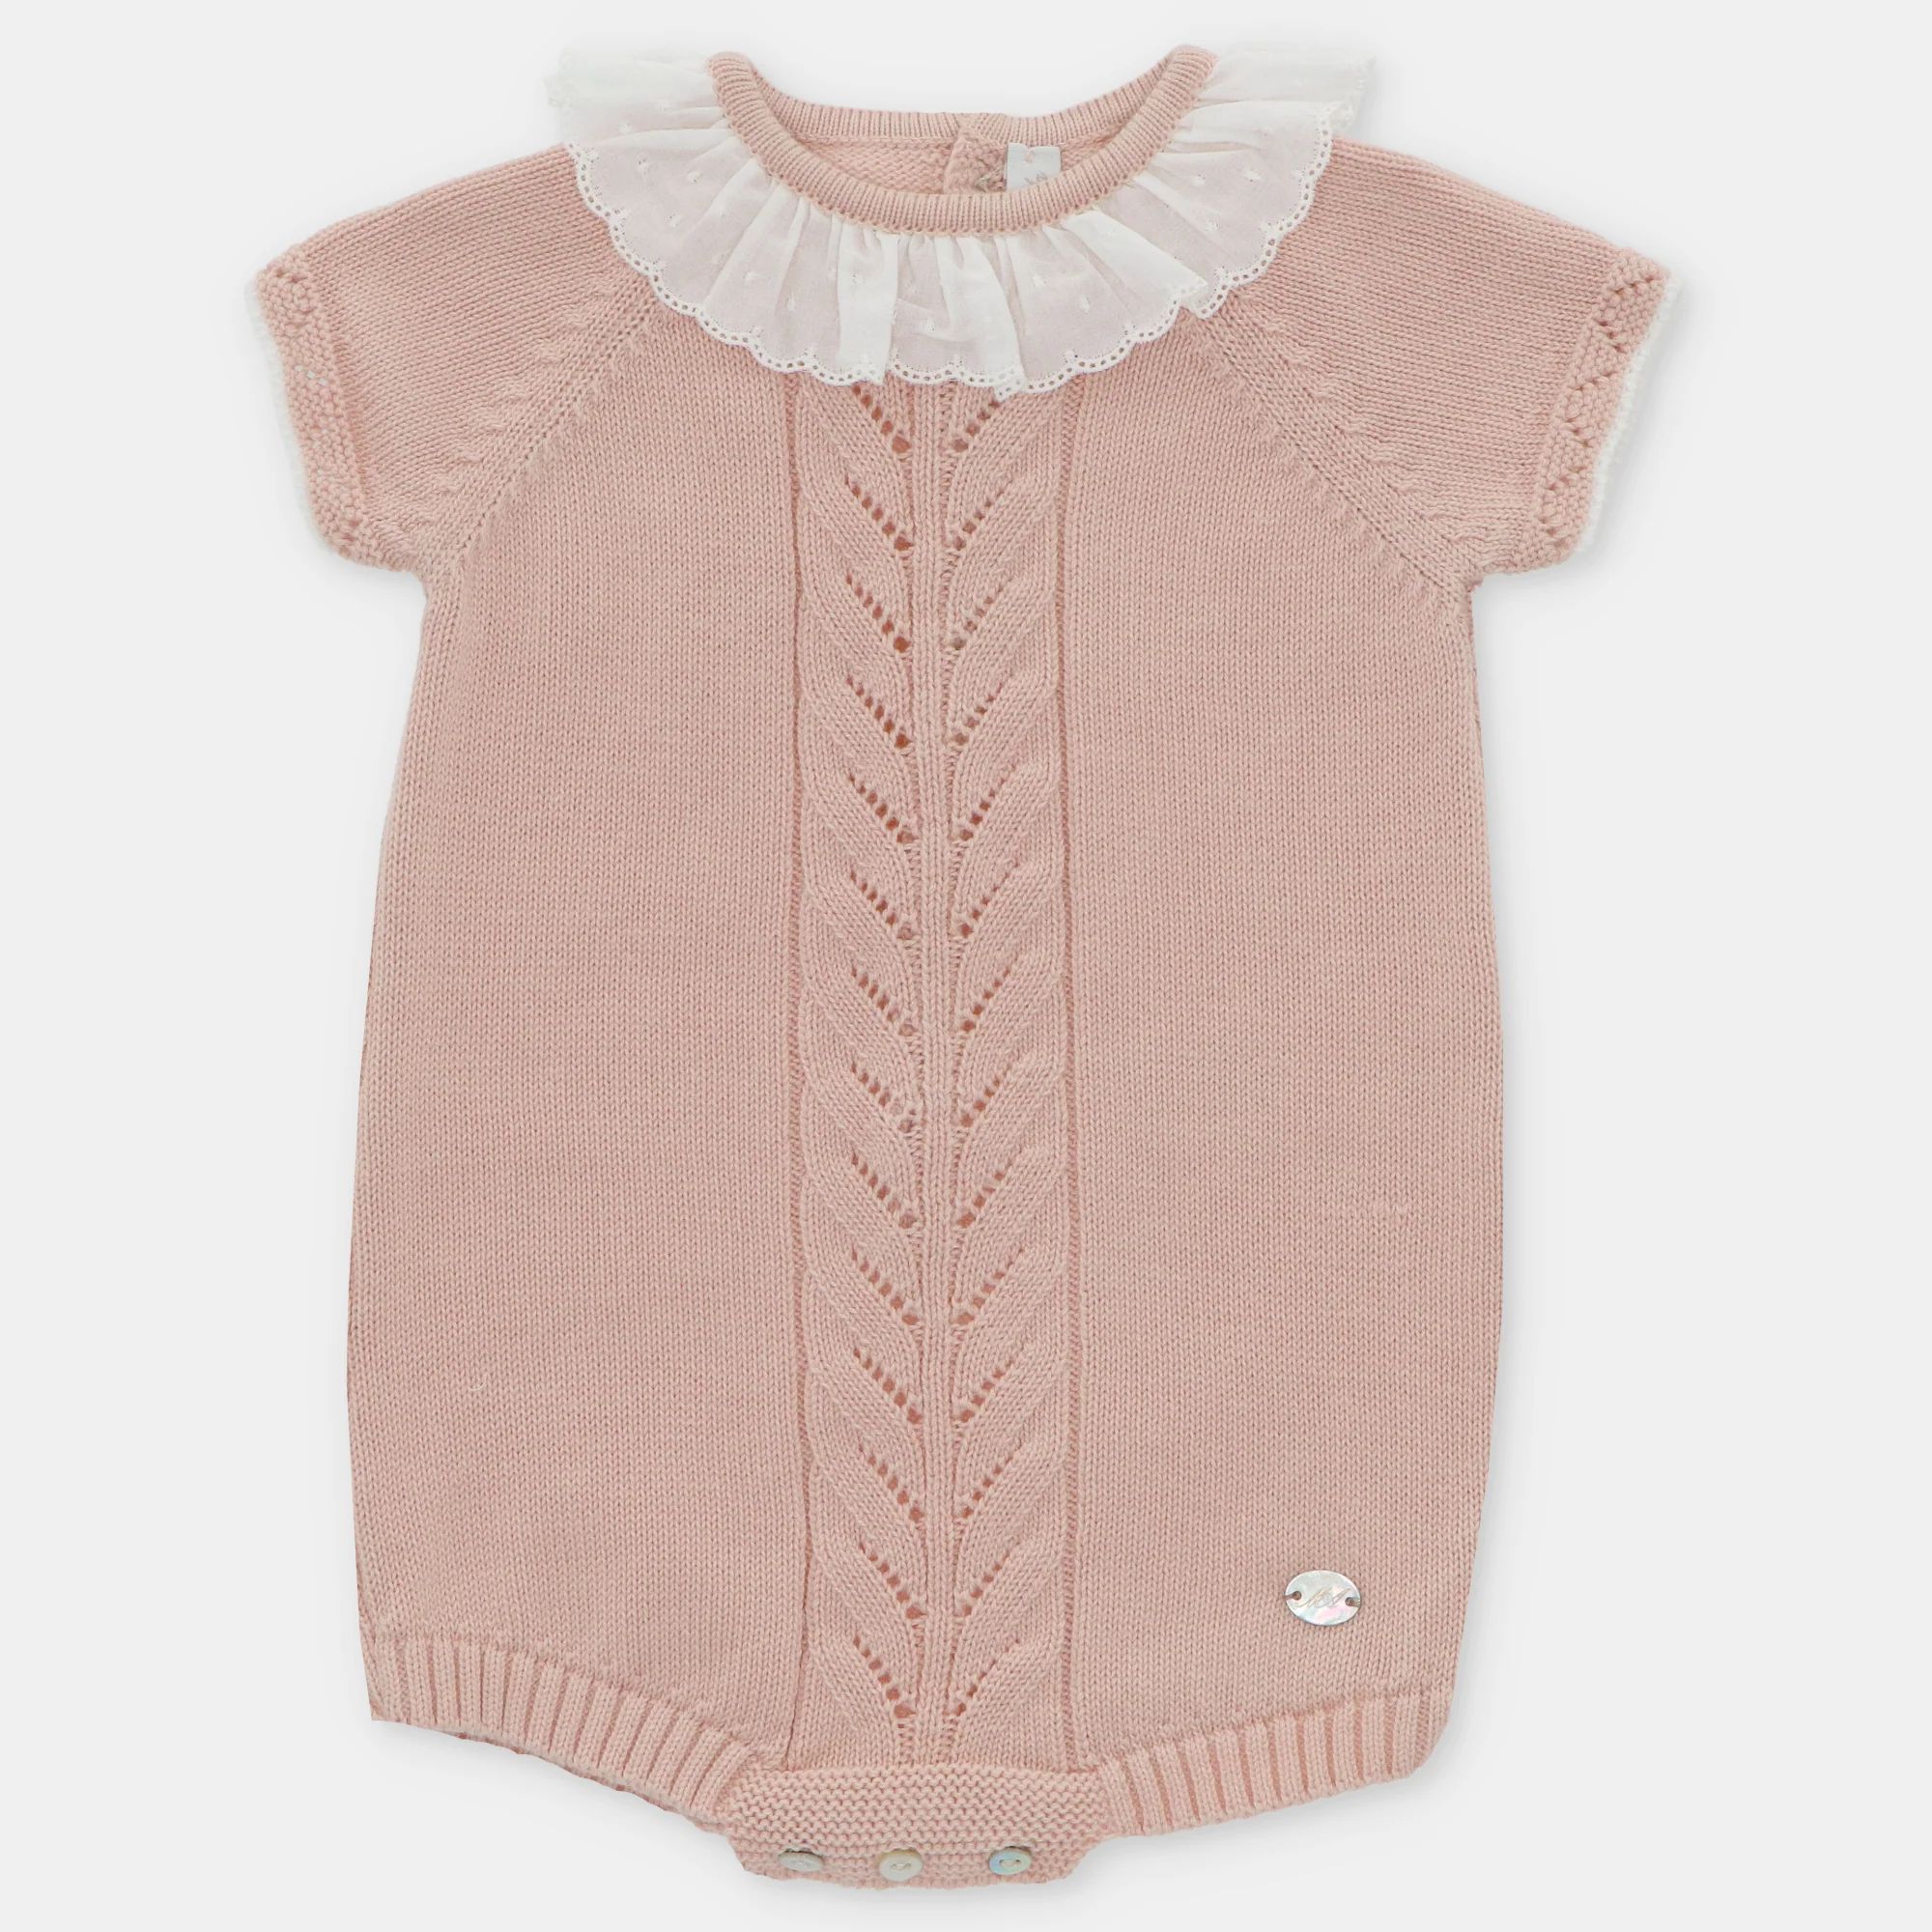 Rose Knit Romper with White Ruffle Collar | Four and Twenty Sailors